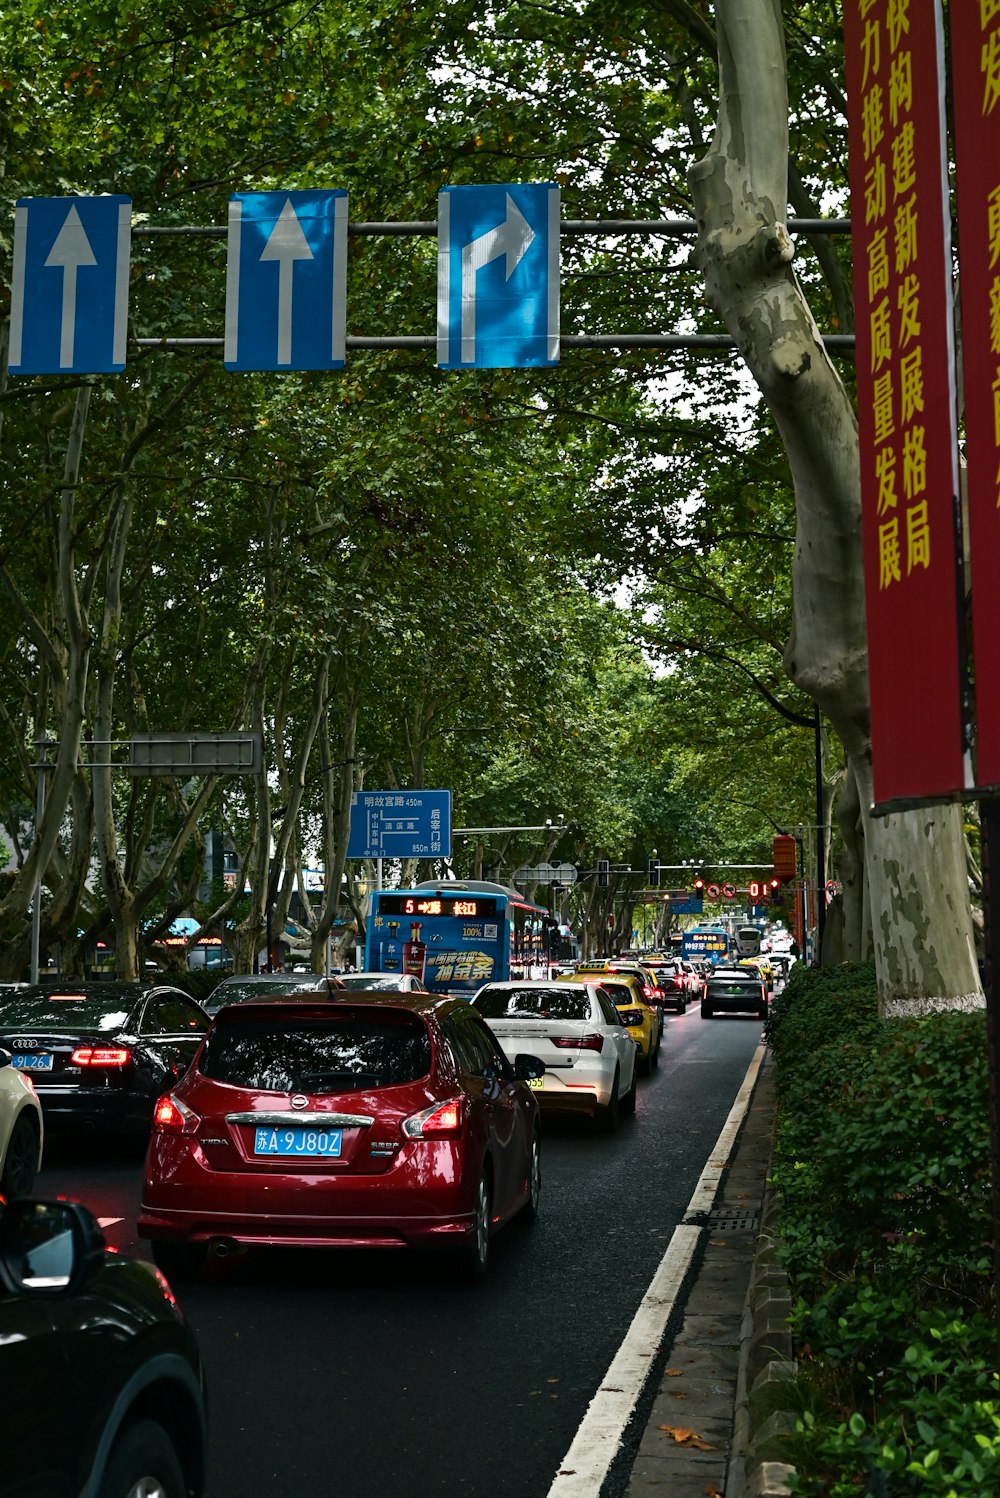 a street filled with lots of traffic next to trees